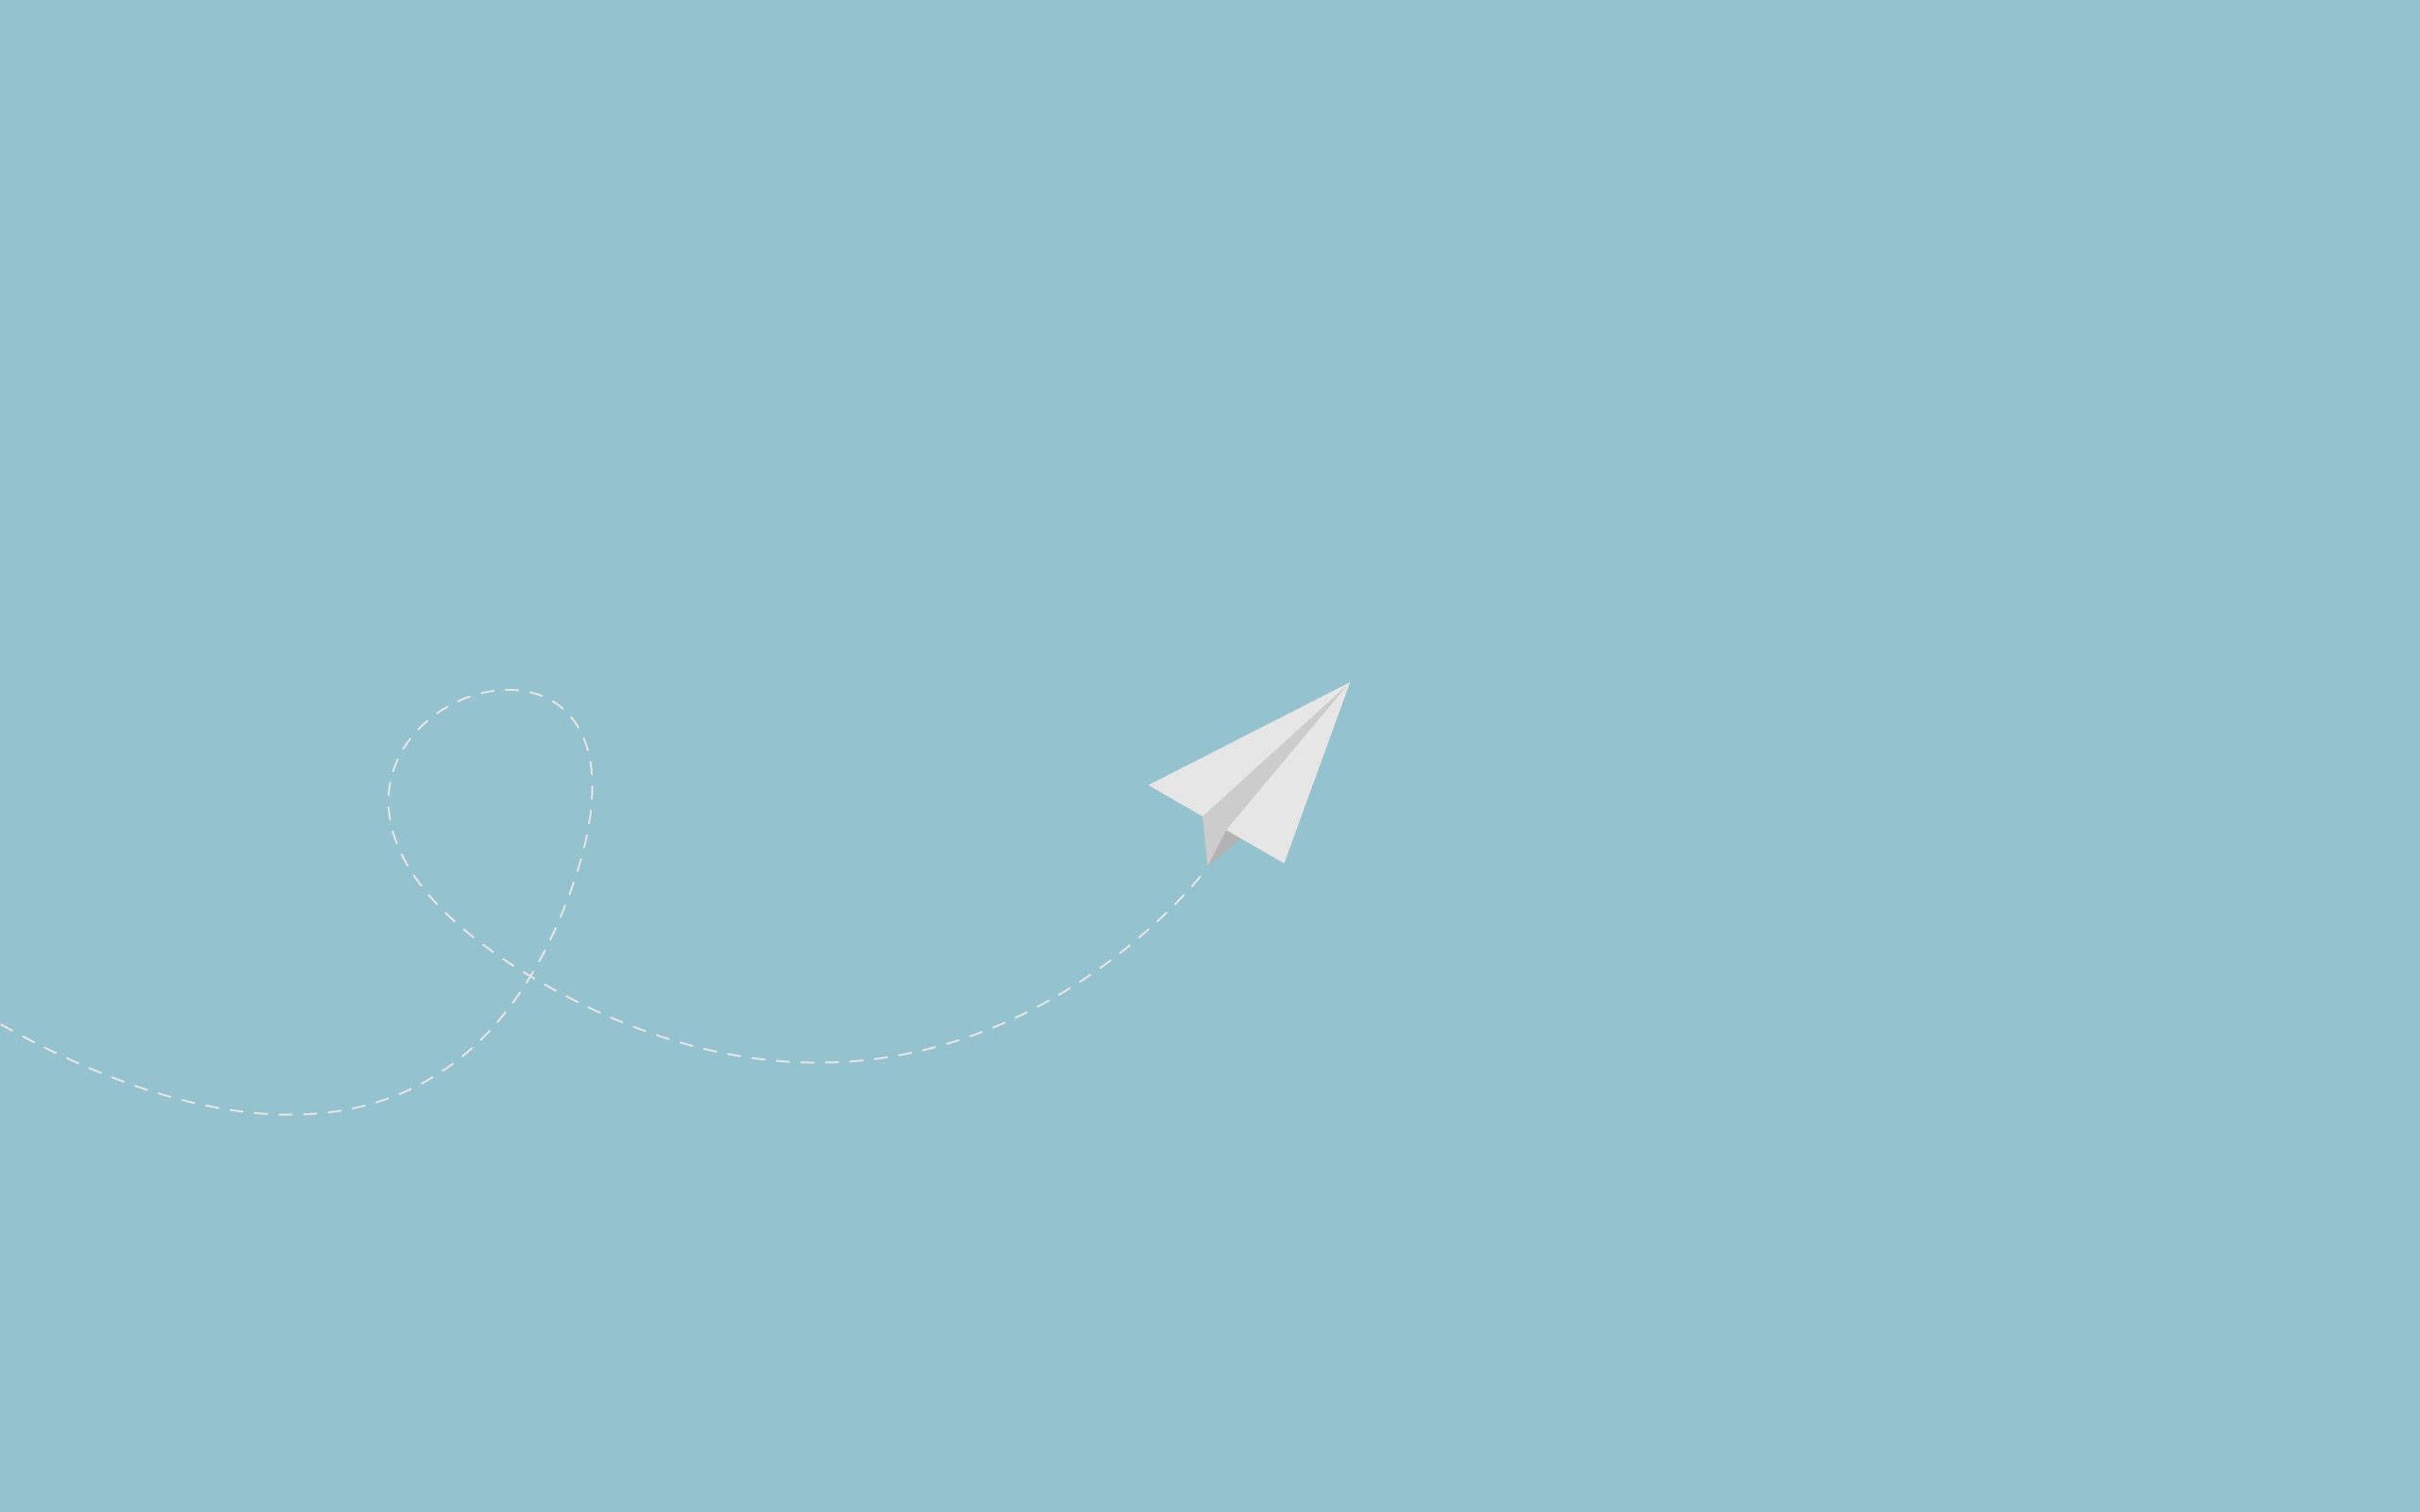 A paper airplane with a dotted line trail flying through the sky. - Blue, teal, minimalist, simple, 2560x1600